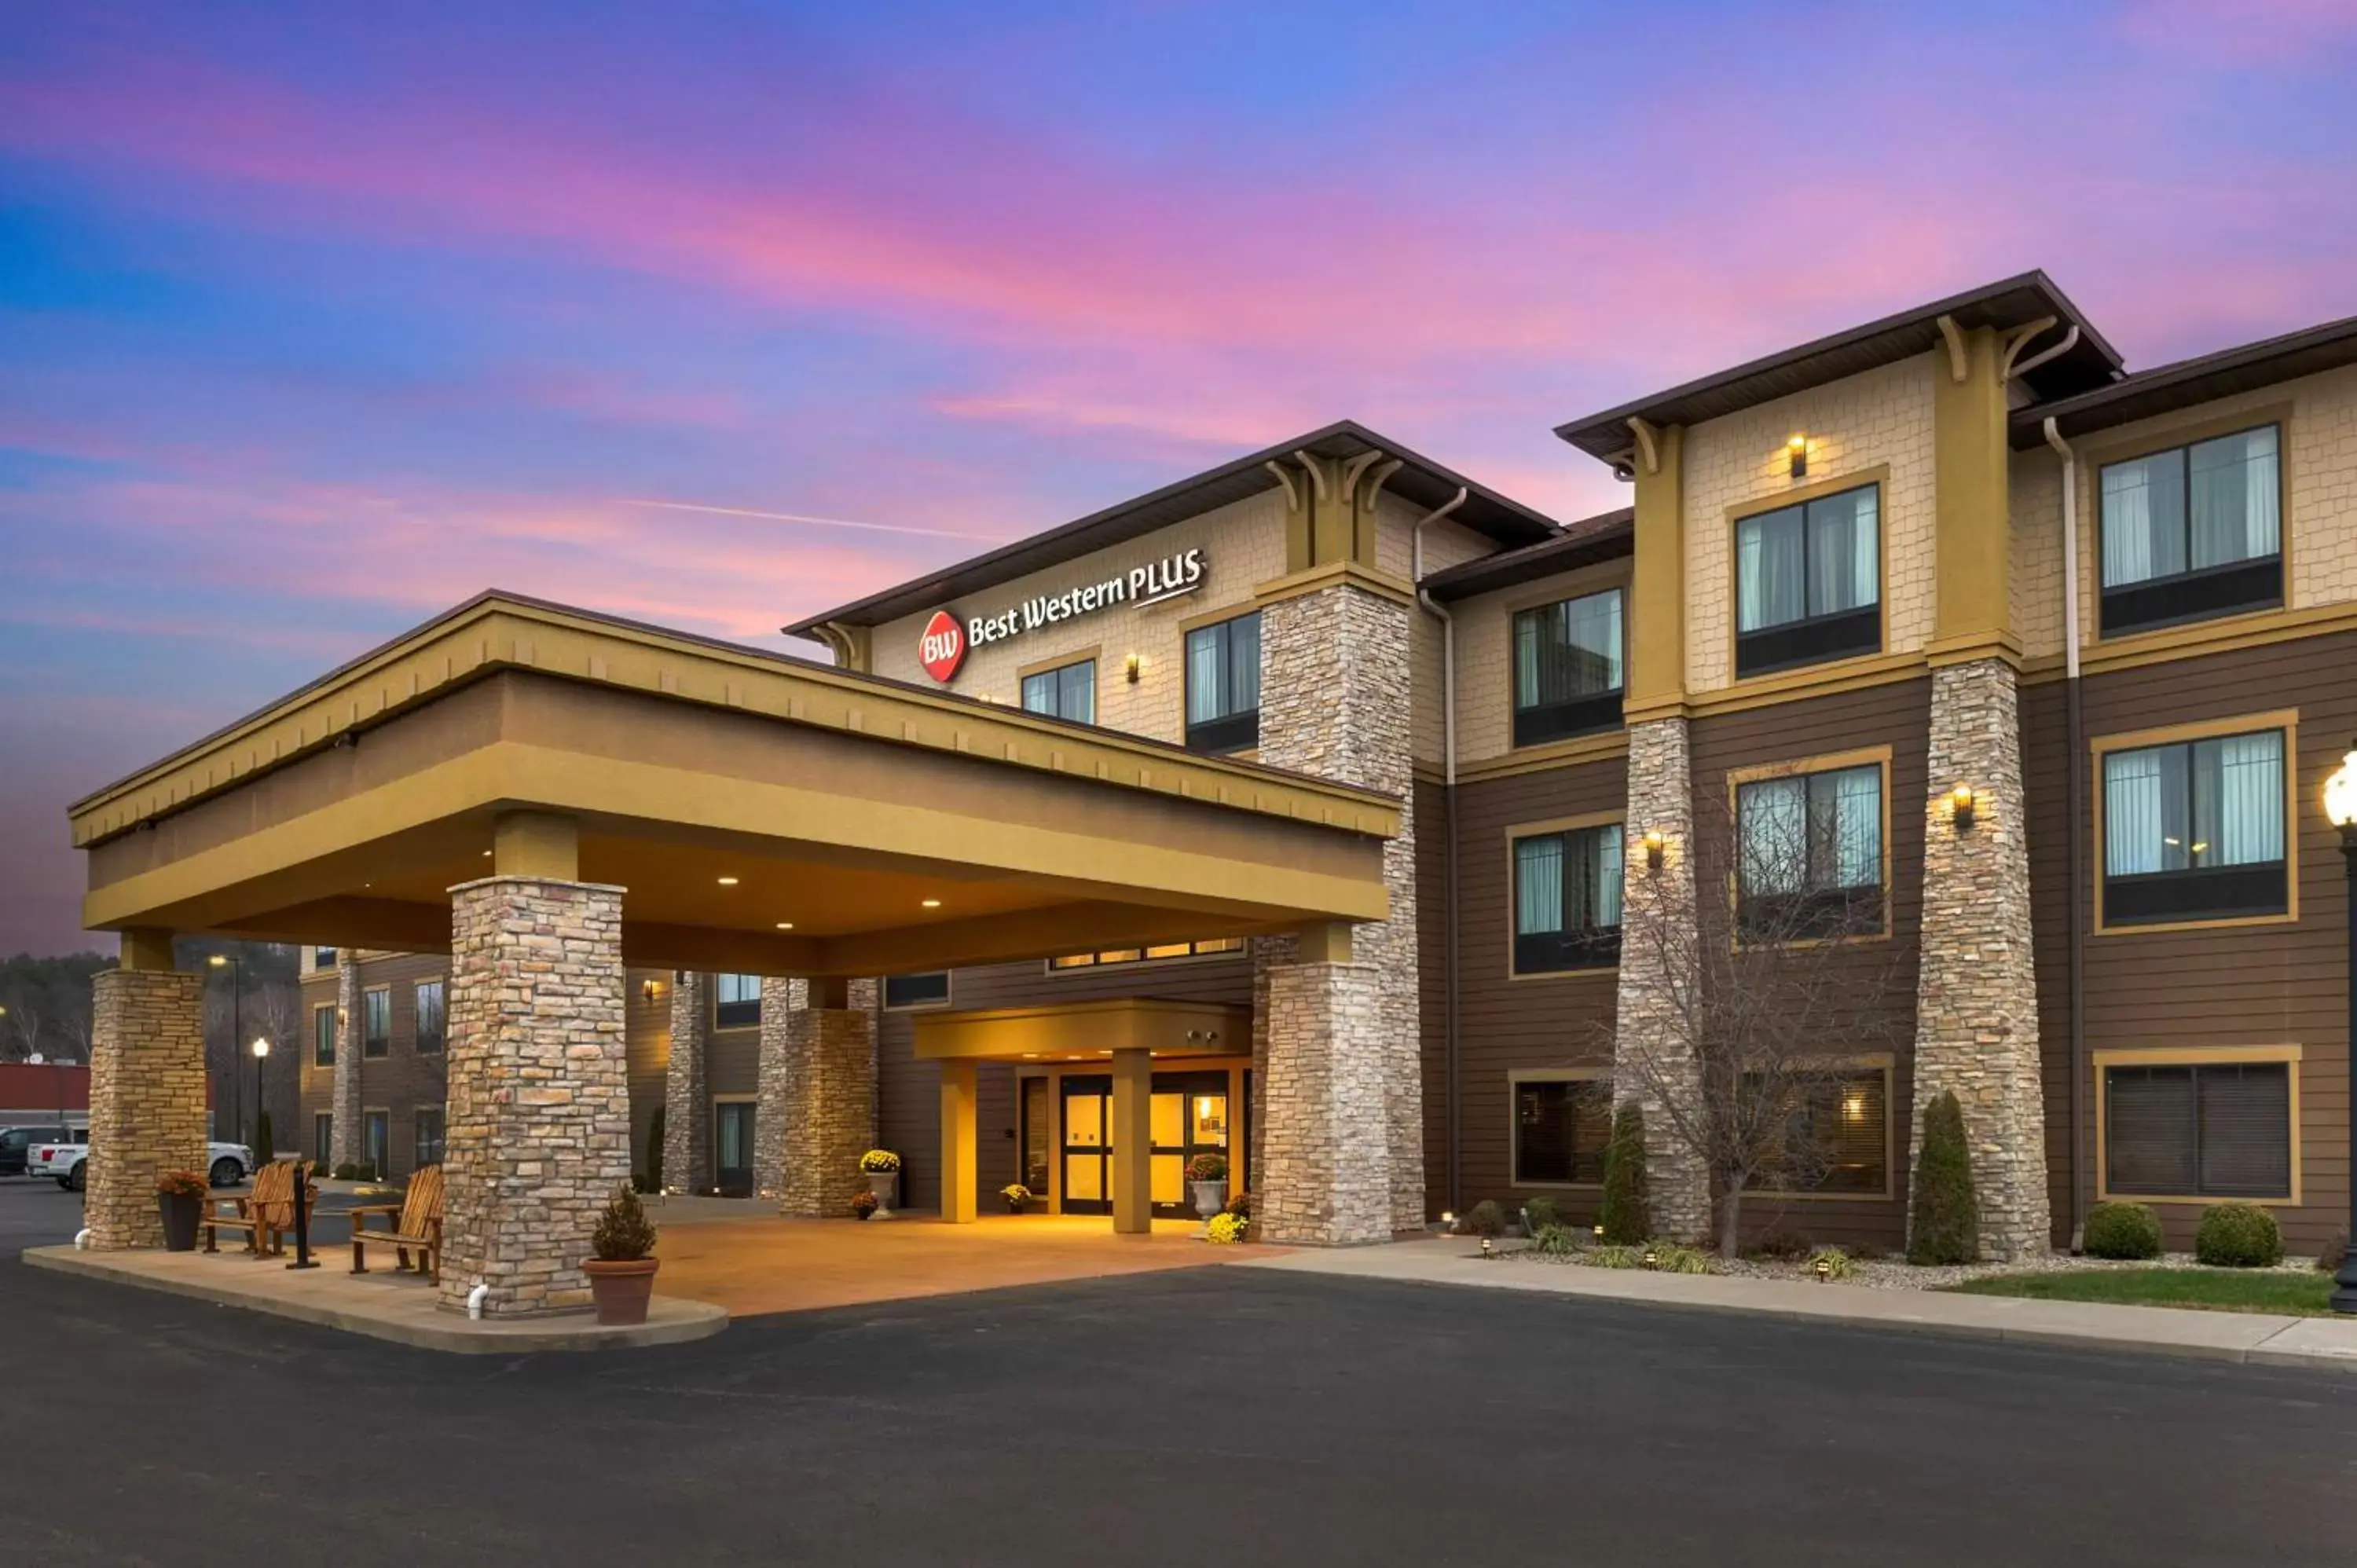 Property Building in Best Western Plus French Lick